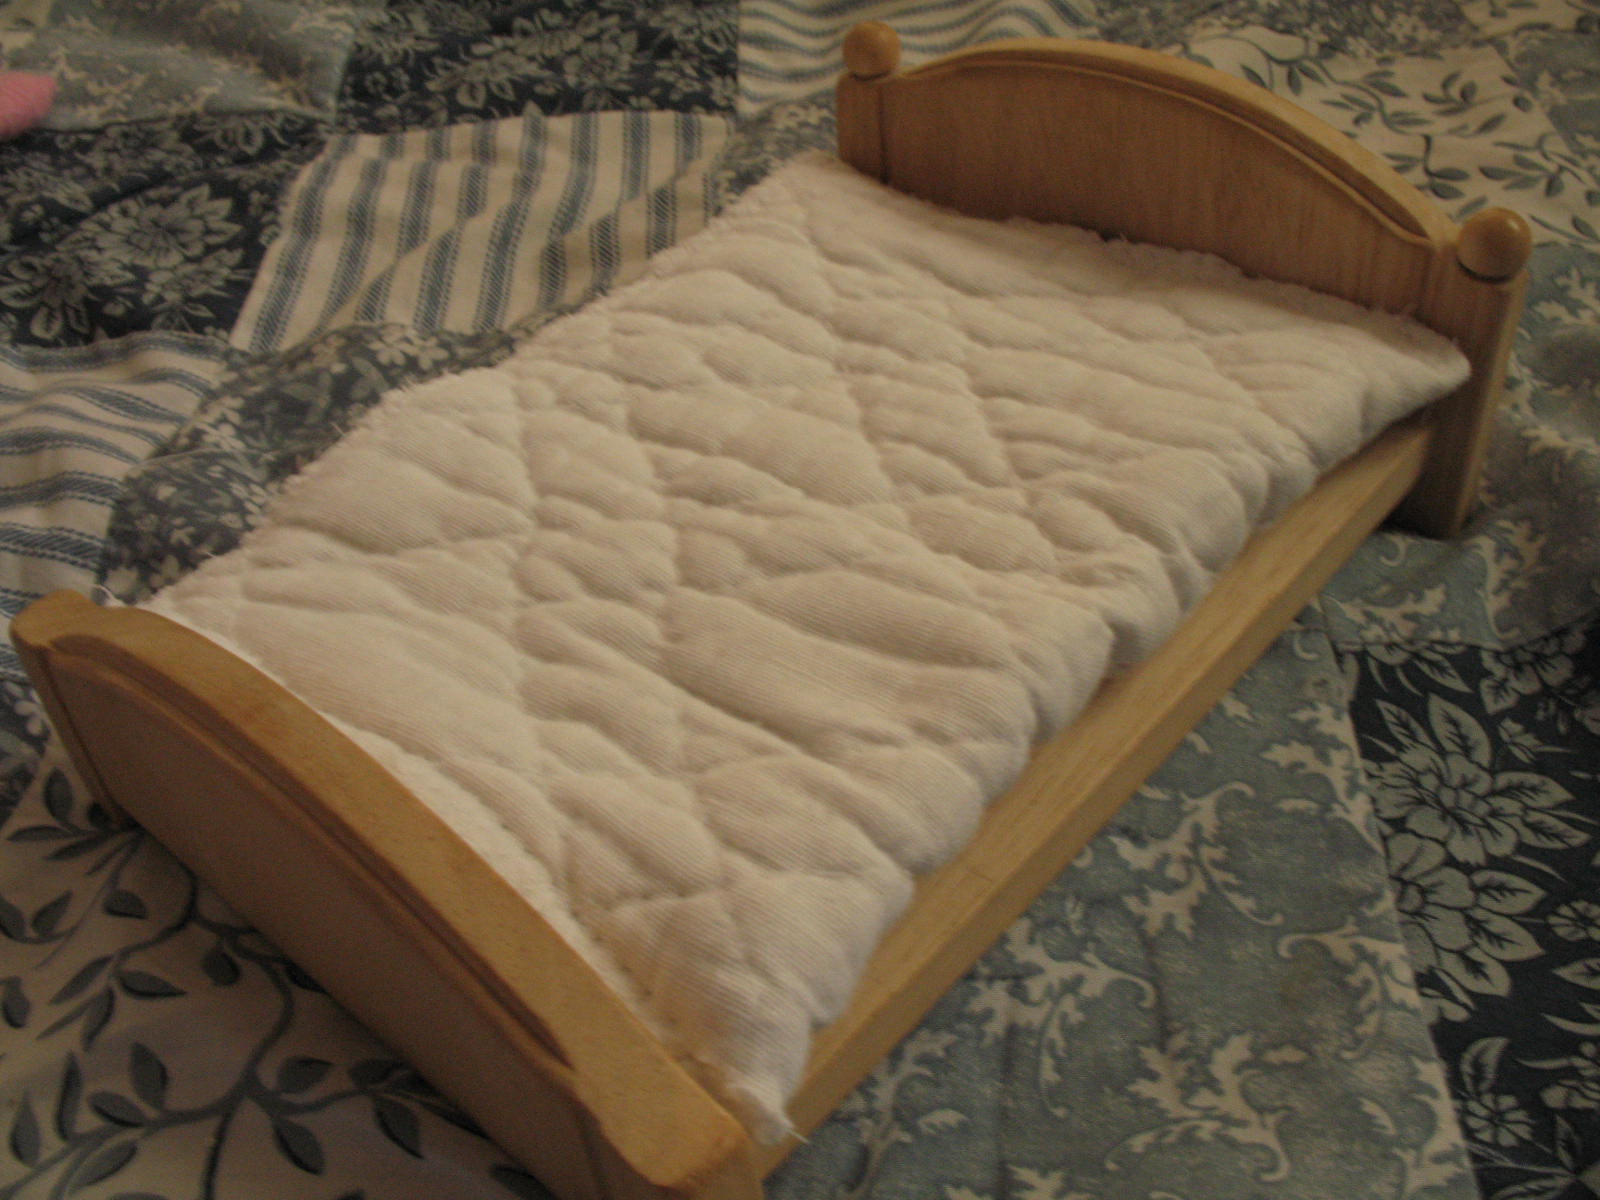 What To Do With An Old Mattress Pad